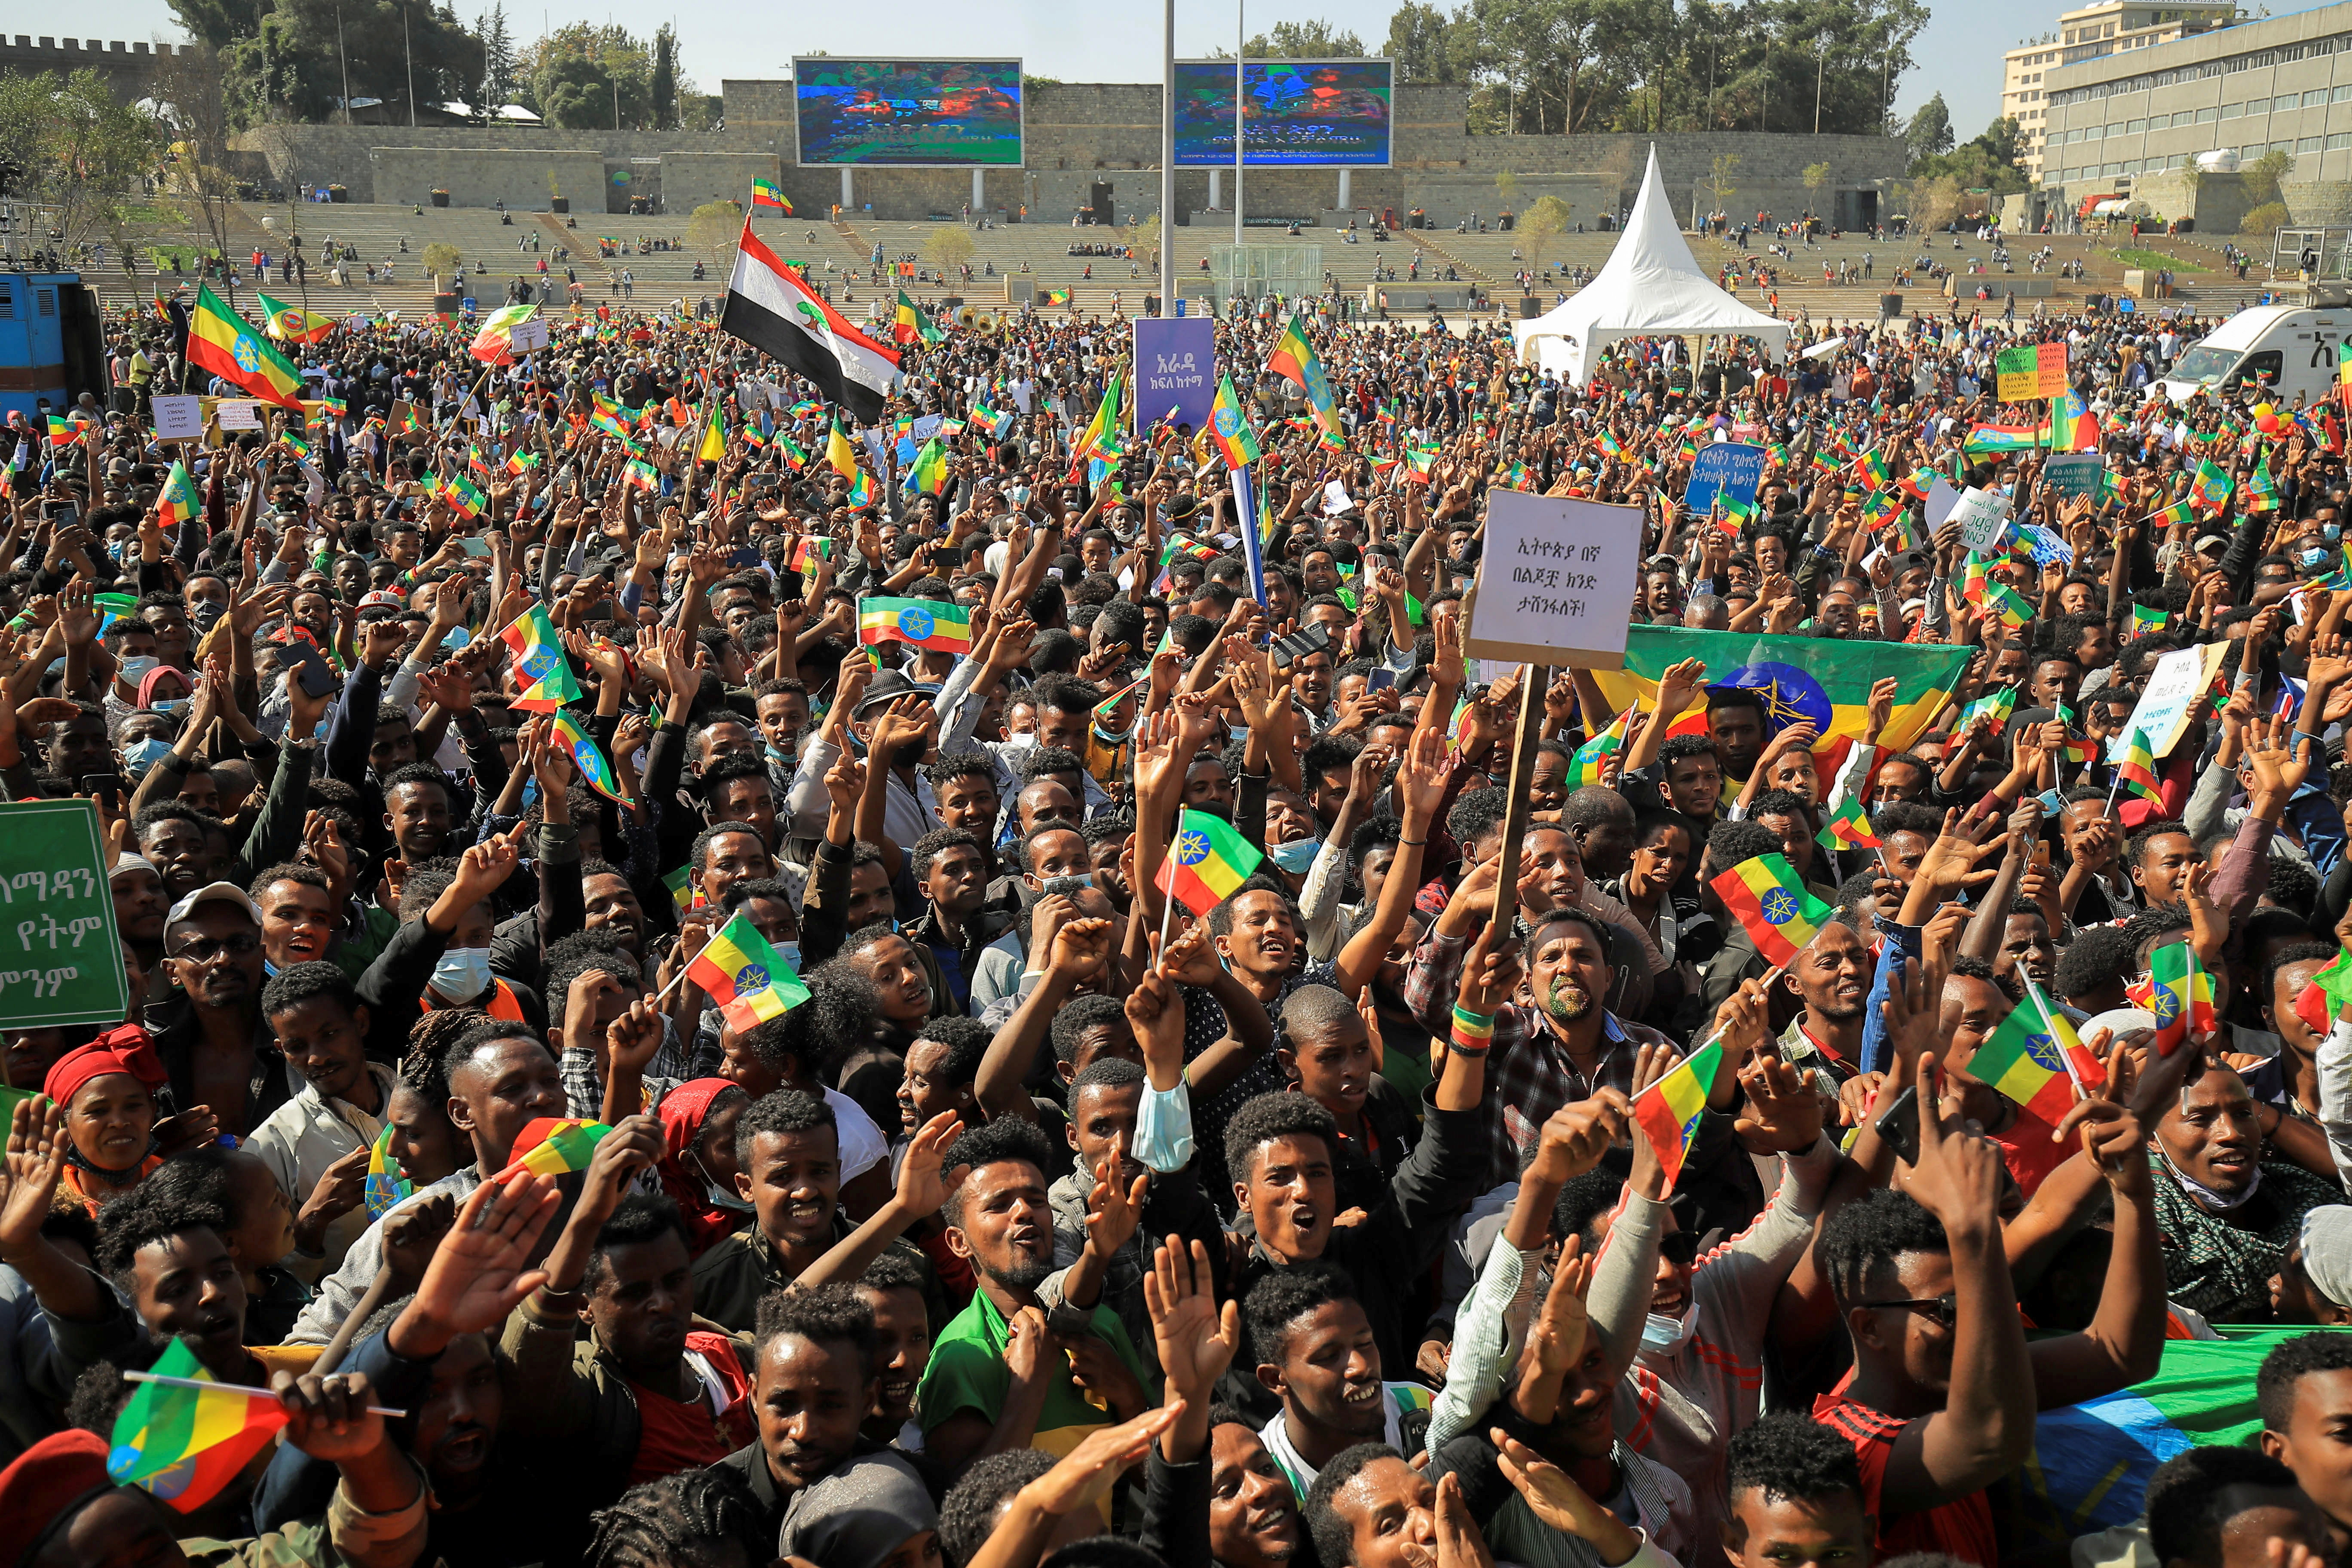 Civilians attend a pro-government rally to denounce what the organisers say is the Tigray People’s Liberation Front (TPLF) and the Western countries' interference in internal affairs of the country, at Meskel Square in Addis Ababa, Ethiopia, November 7, 2021. REUTERS/Tiksa Negeri